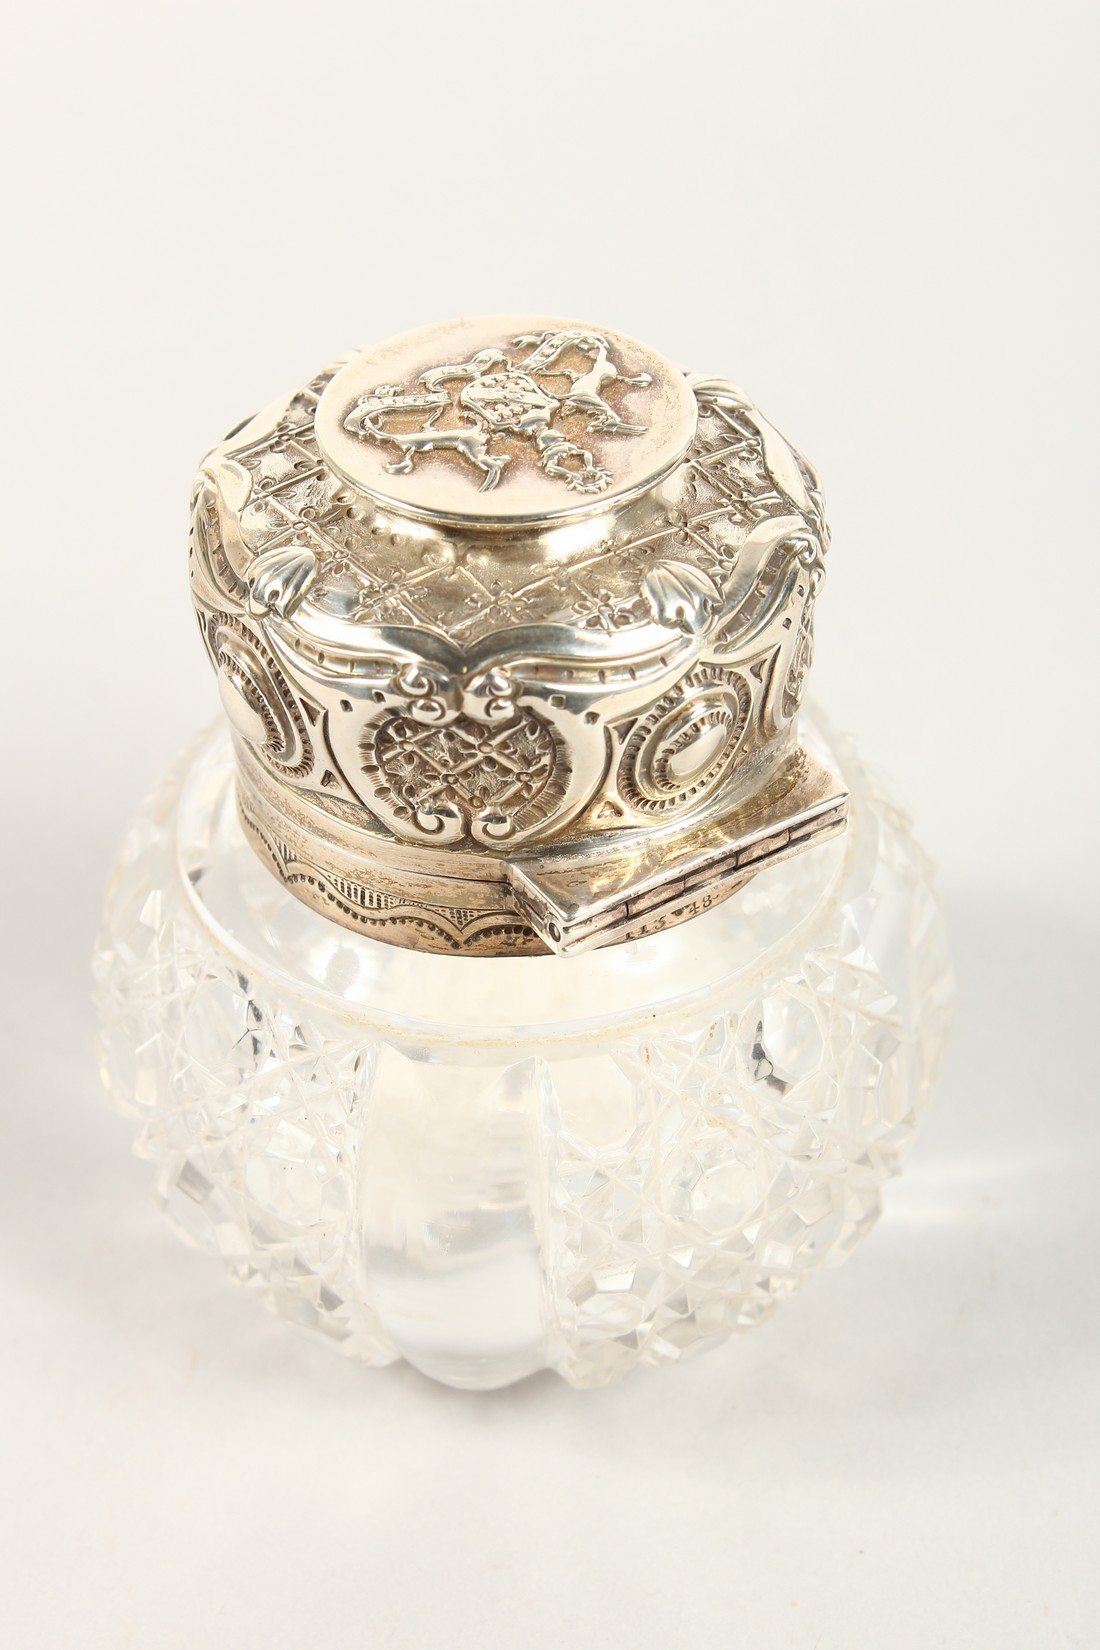 A CUT GLASS CIRCULAR SCENT BOTTLE AND COVER London 1896 - Image 4 of 5